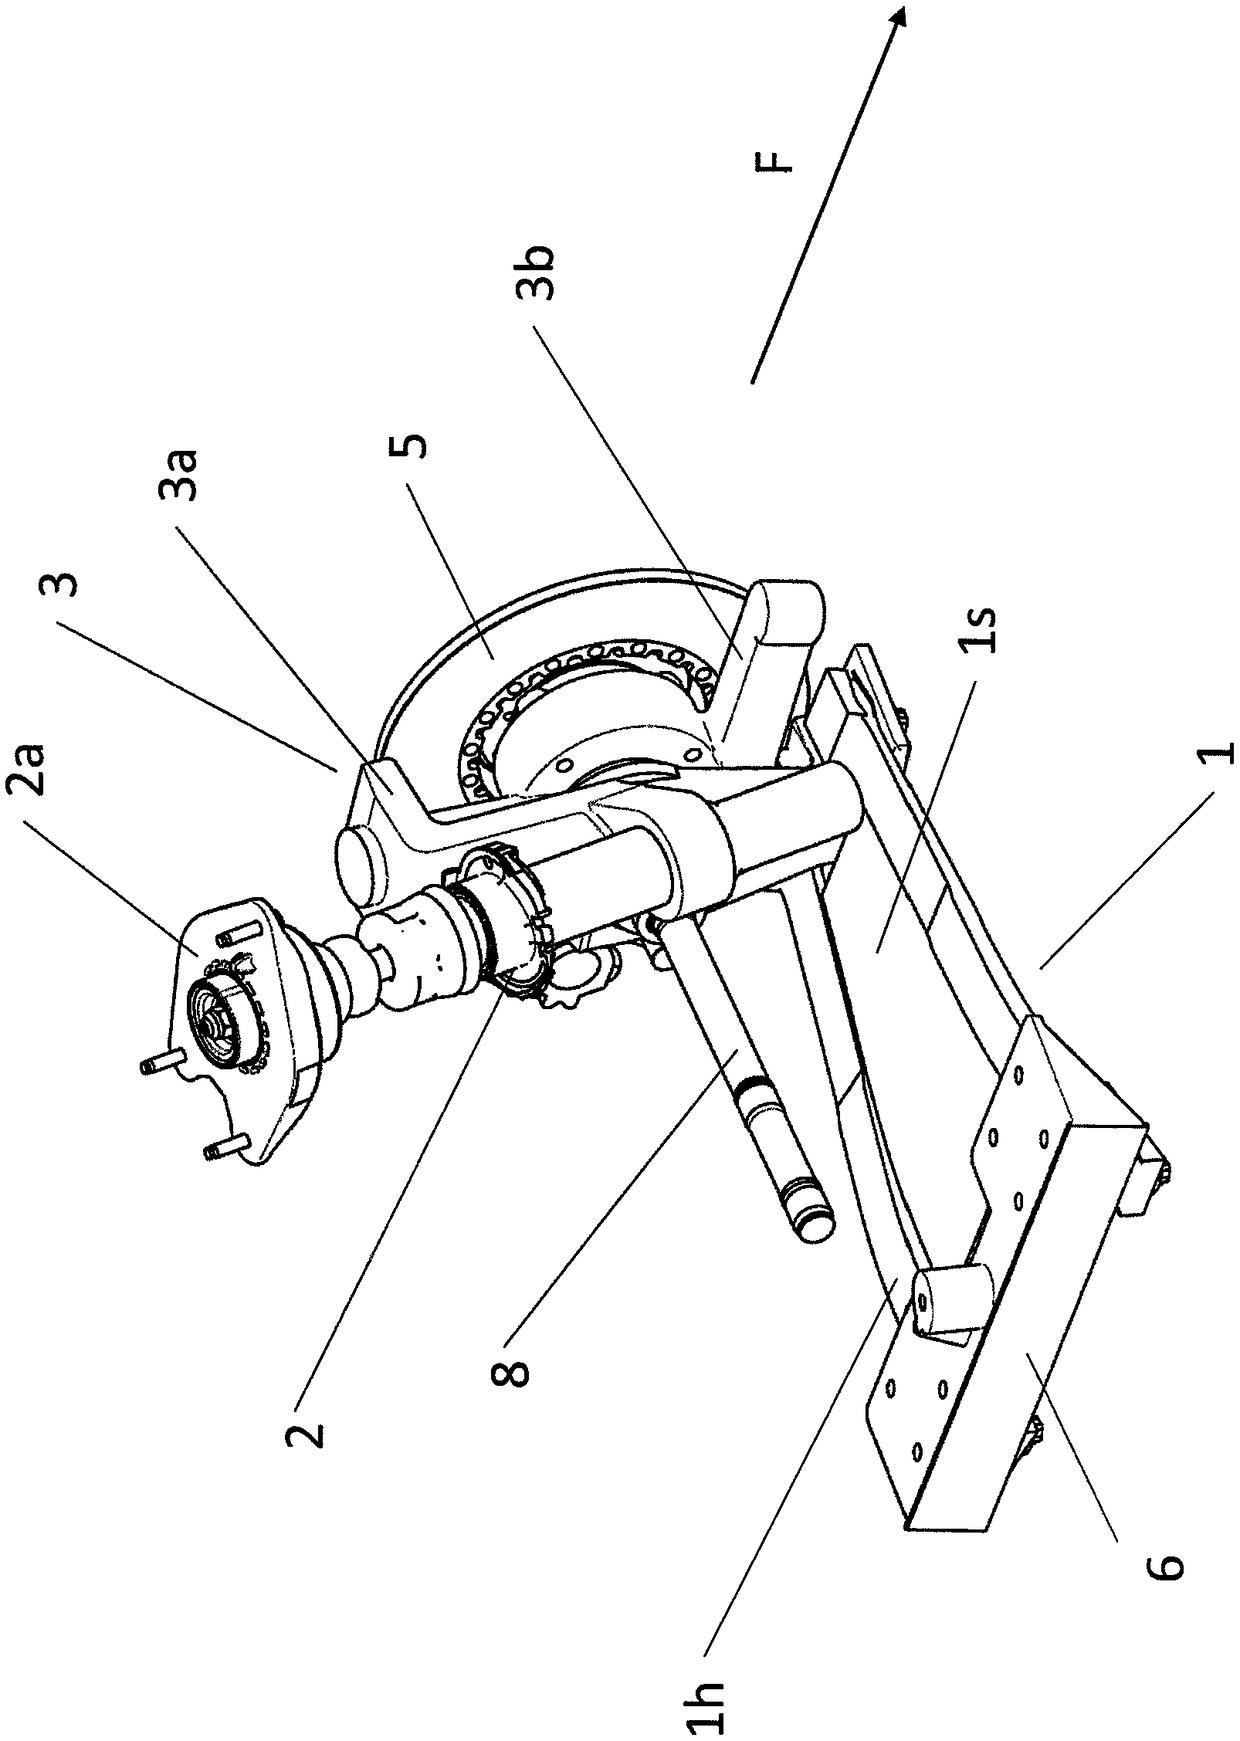 Single-wheel suspension arrangement of a vehicle having a wheel-controlling leaf spring element composed of a fiber composite material